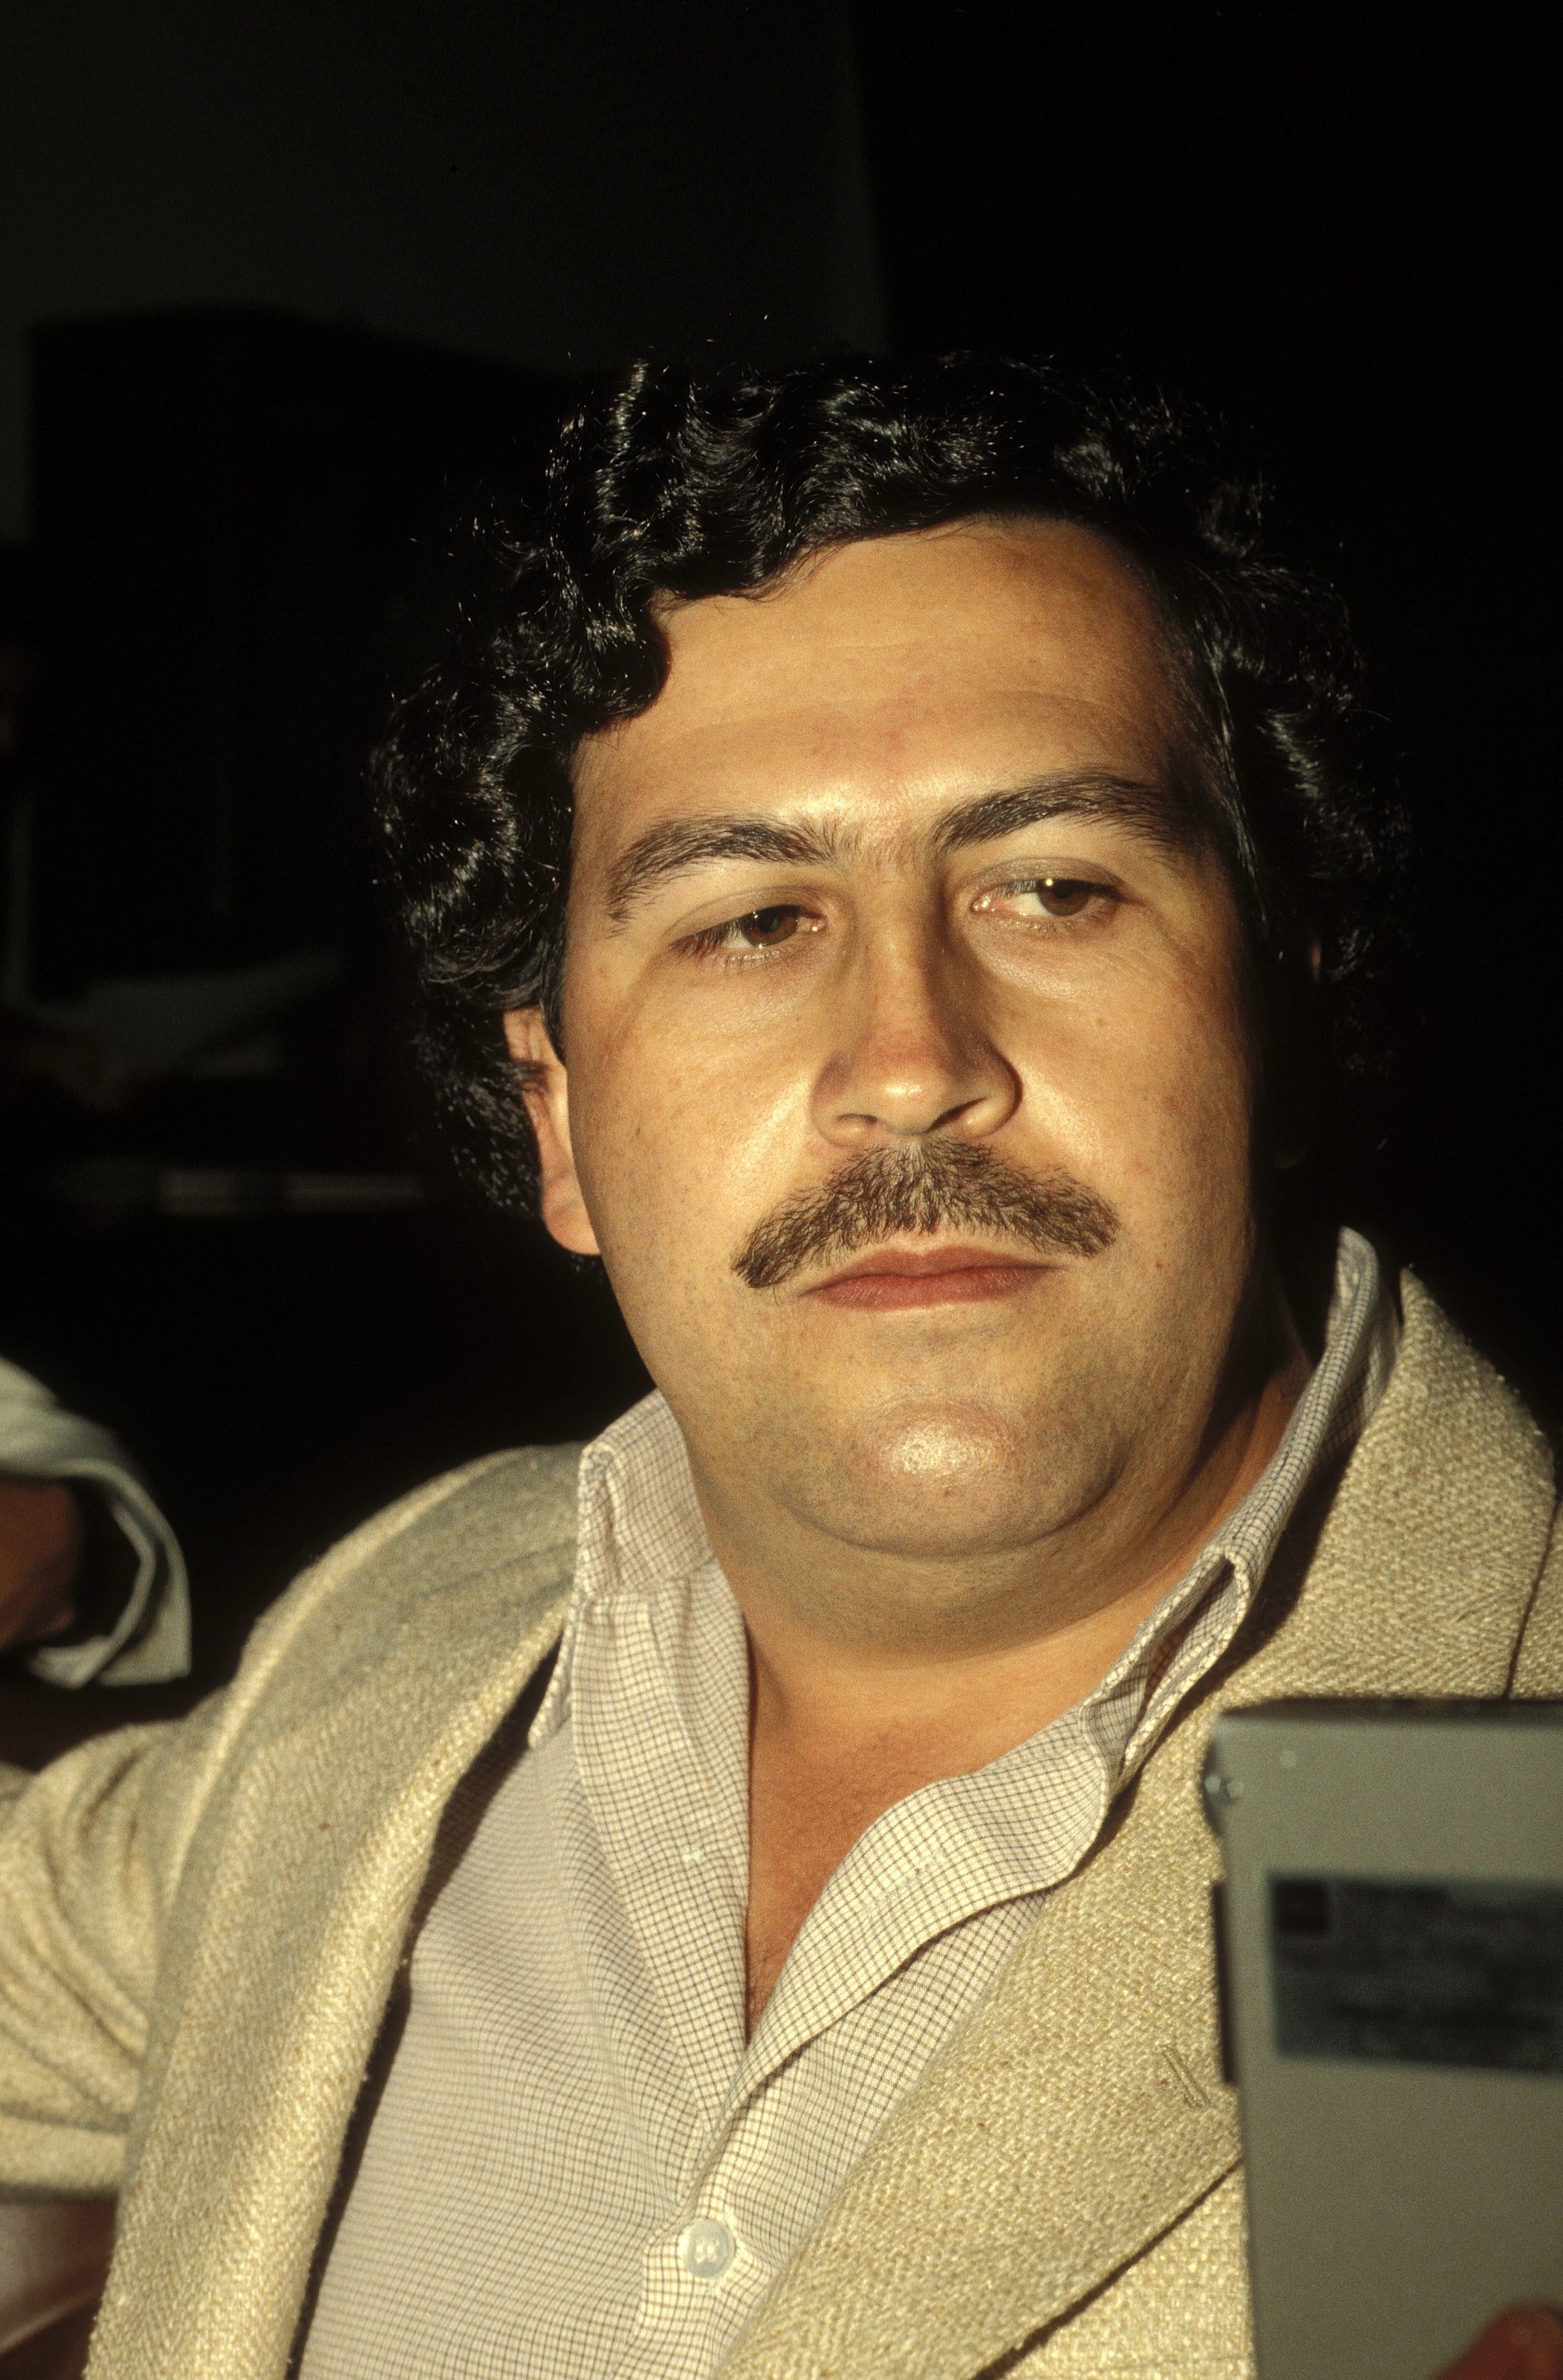 The Chilling True Story Behind Pablo Escobar's Smile In First And Final Mugshot